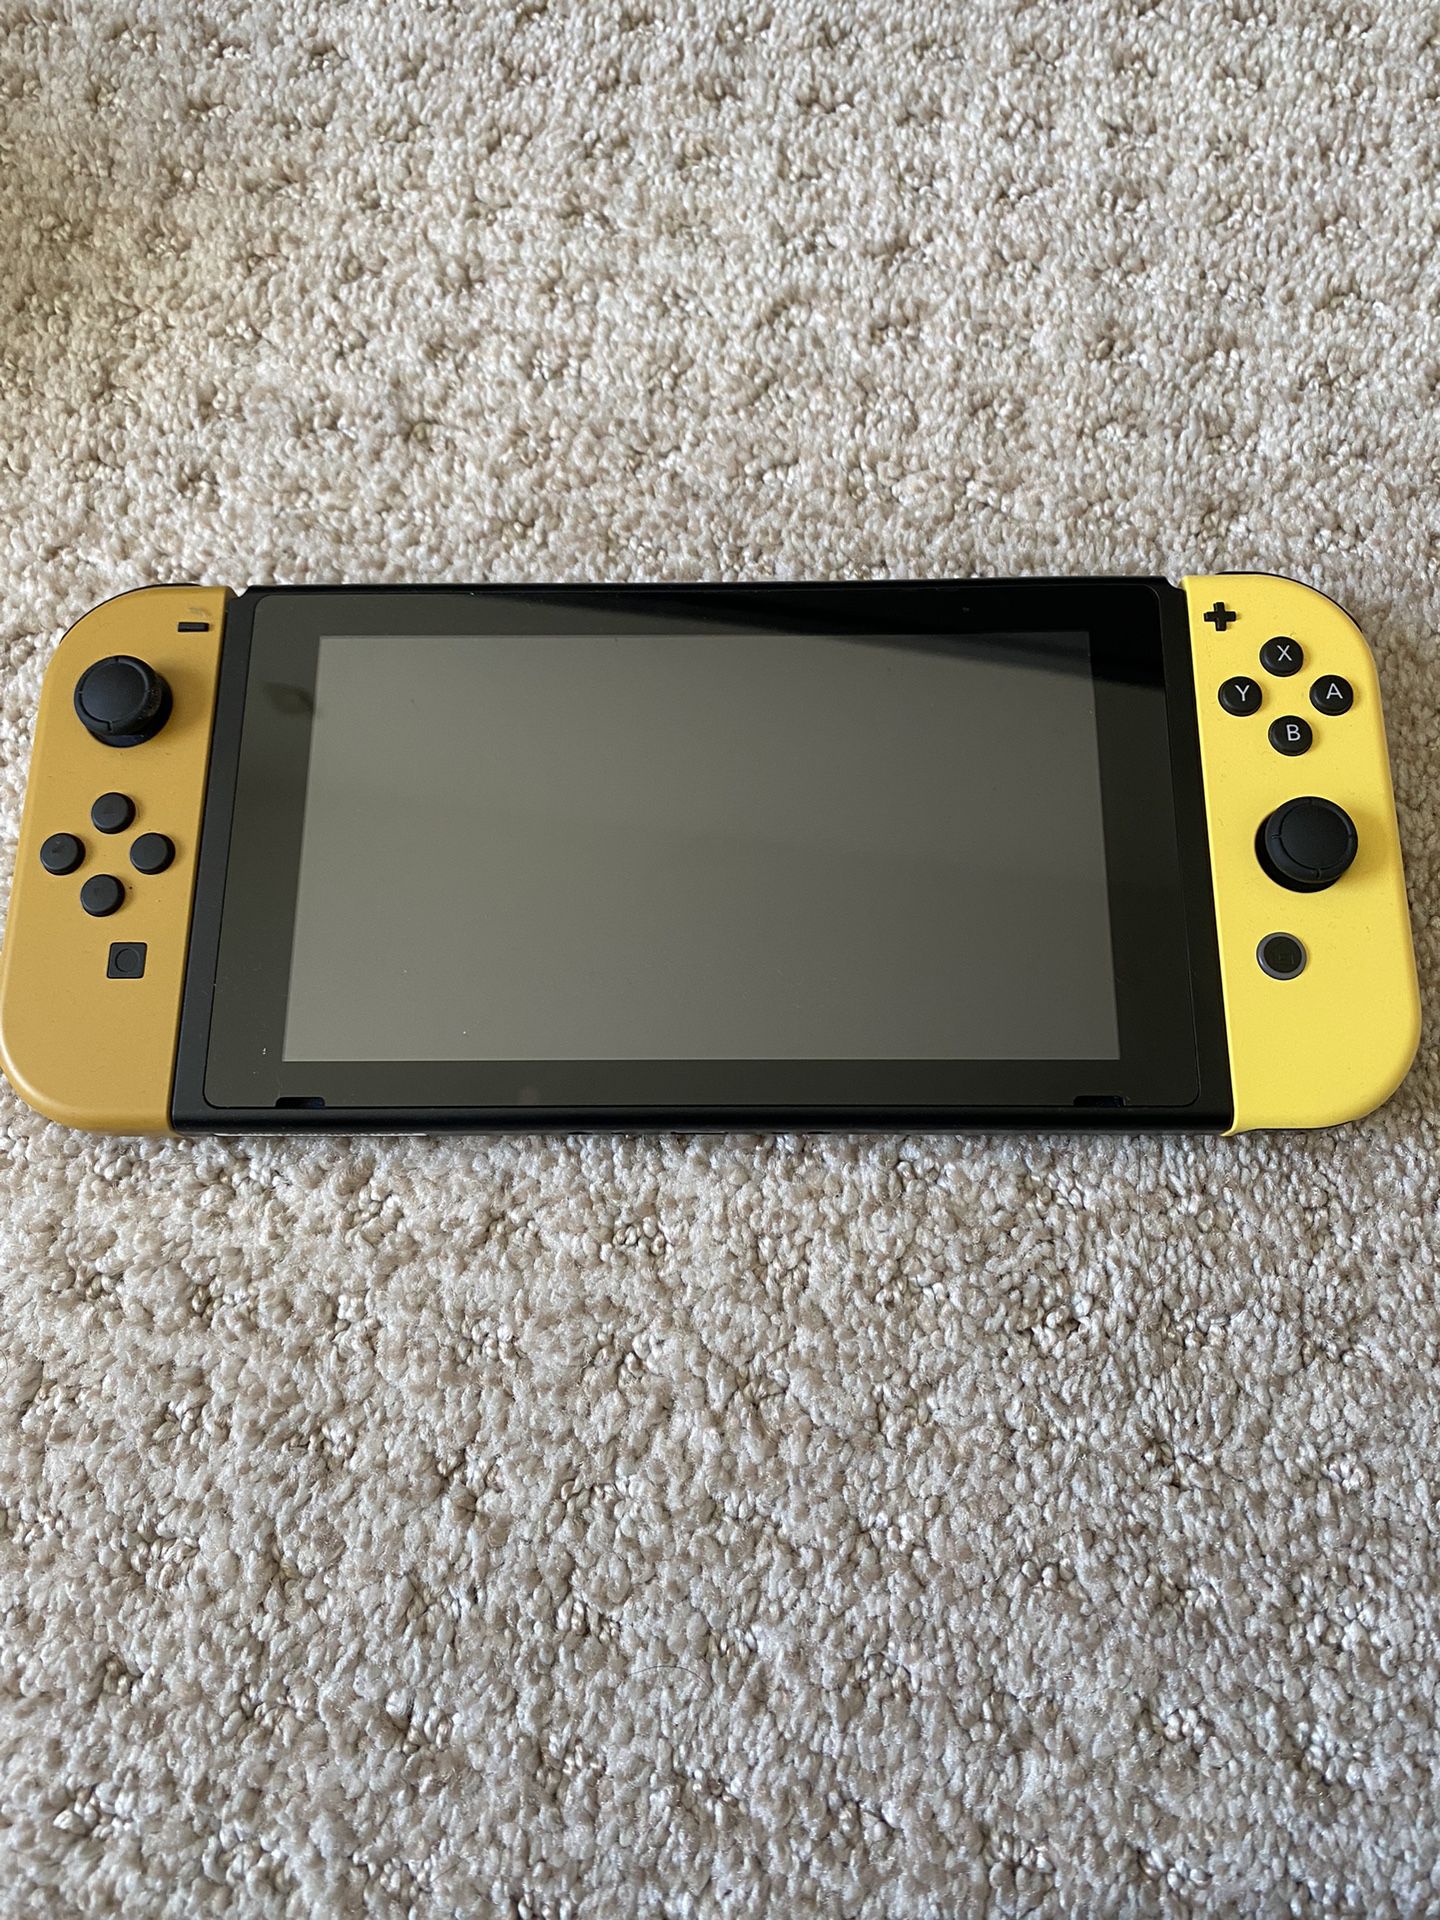 Nintendo Switch with Let’s Go Pikachu Game